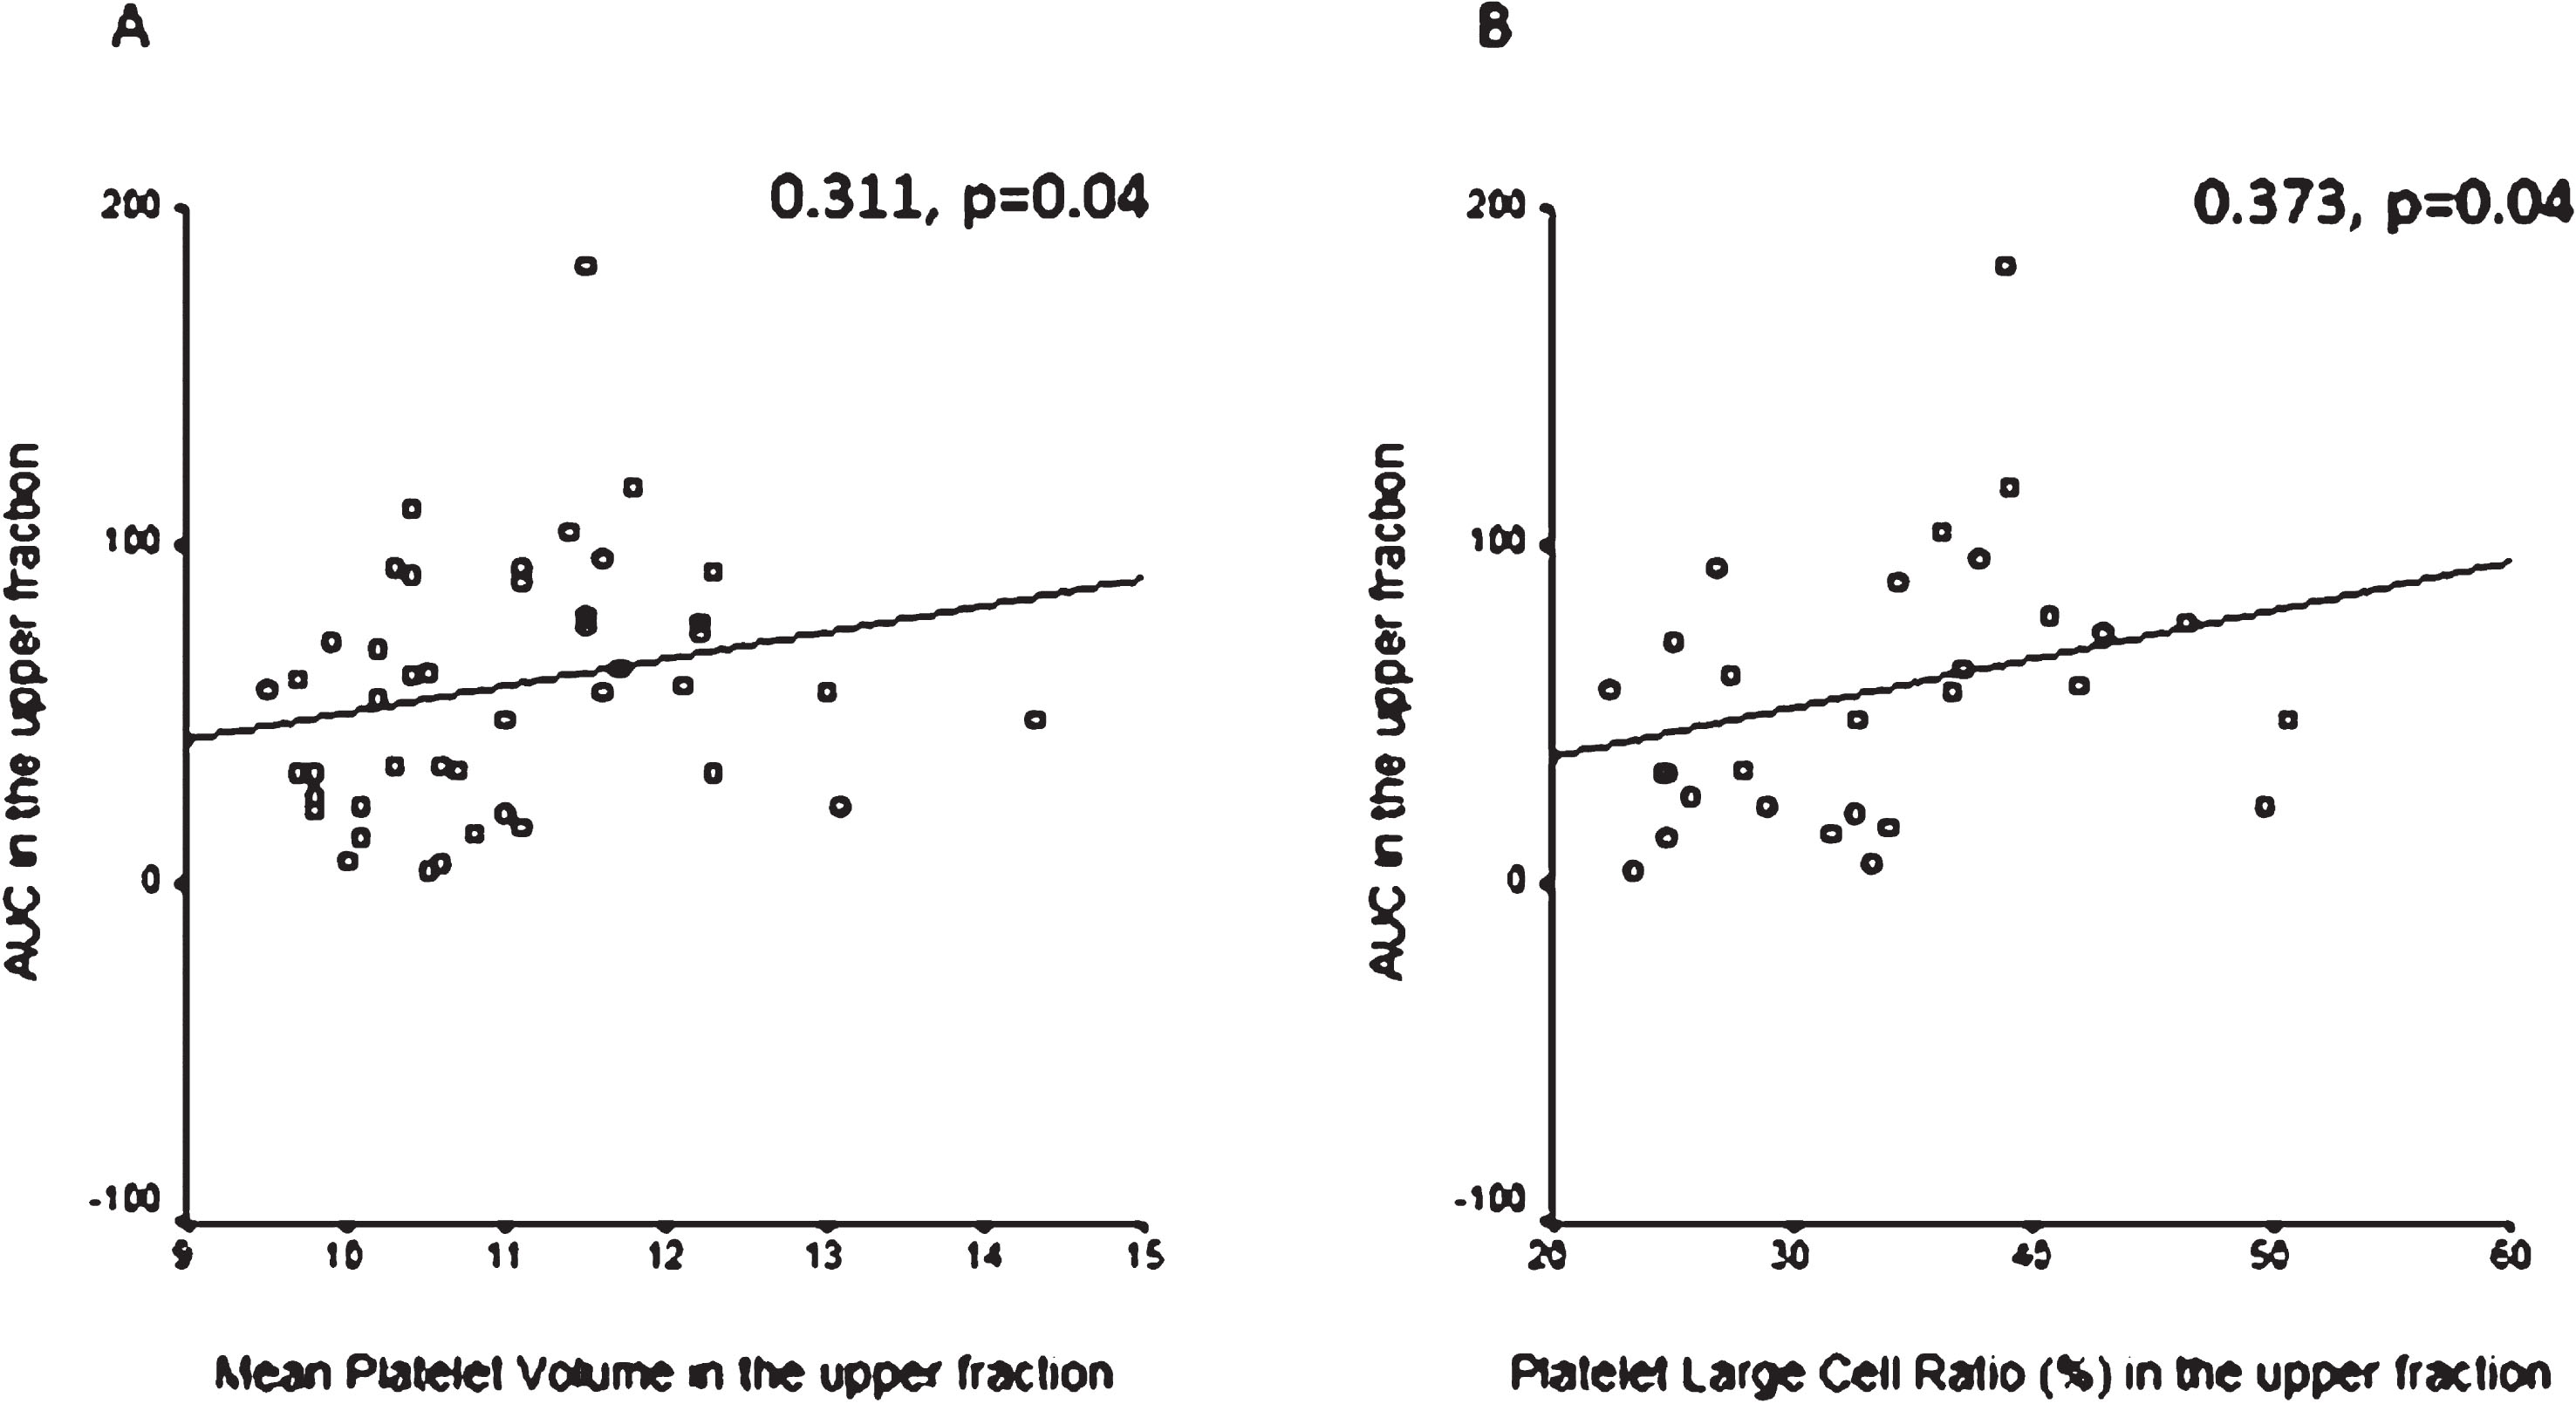 A: Correlation between mean platelet volume (MPV) and aggregation expressed as area under the curve (AUC) measured in the upper samples. Positive correlation in the upper samples between mean platelet volume (MPV) and area under the curve (AUC) determined by Multiplate aggregometry in patients on antiplatelet therapy. Spearman correlation. B: Correlation between platelet large cell ratio (PLCR) and aggregation expressed as area under the curve (AUC) measured in the upper samples. Positive correlation in the upper samples between platelet large cell ratio (PLCR) and area under the curve (AUC) determined by Multiplate aggregometry in patients on antiplatelet therapy. Spearman correlation.